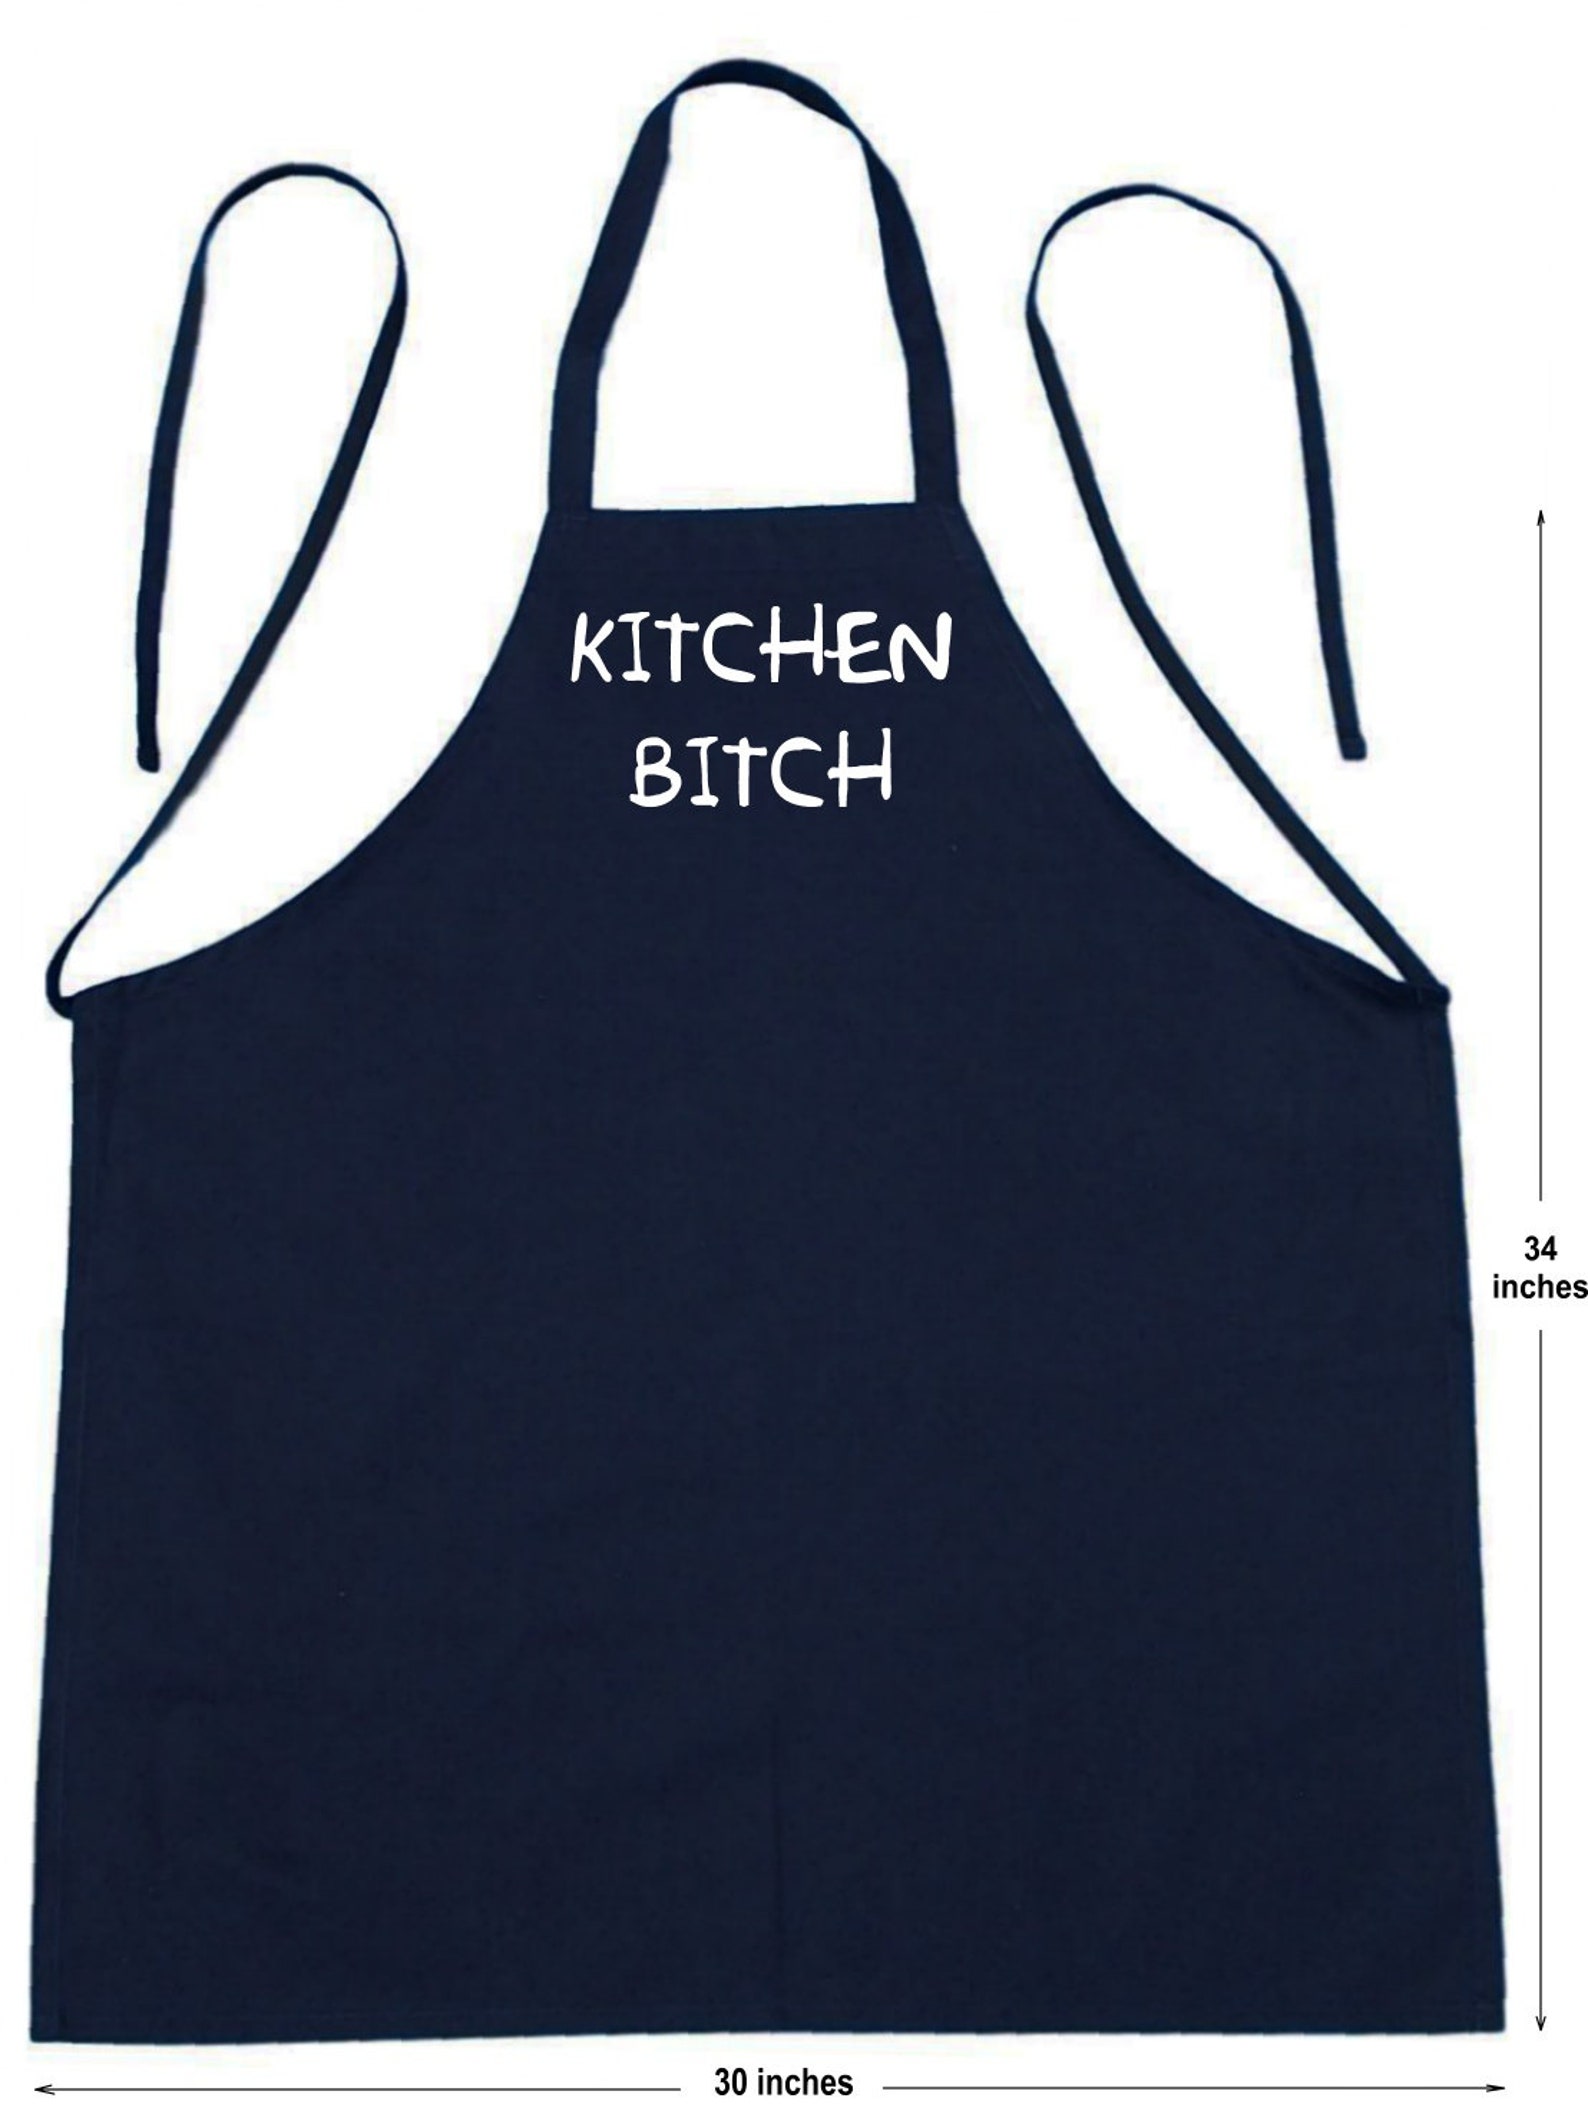 Funny Cooking Aprons Kitchen Bitch Adults Black Apron Novelty Etsy 